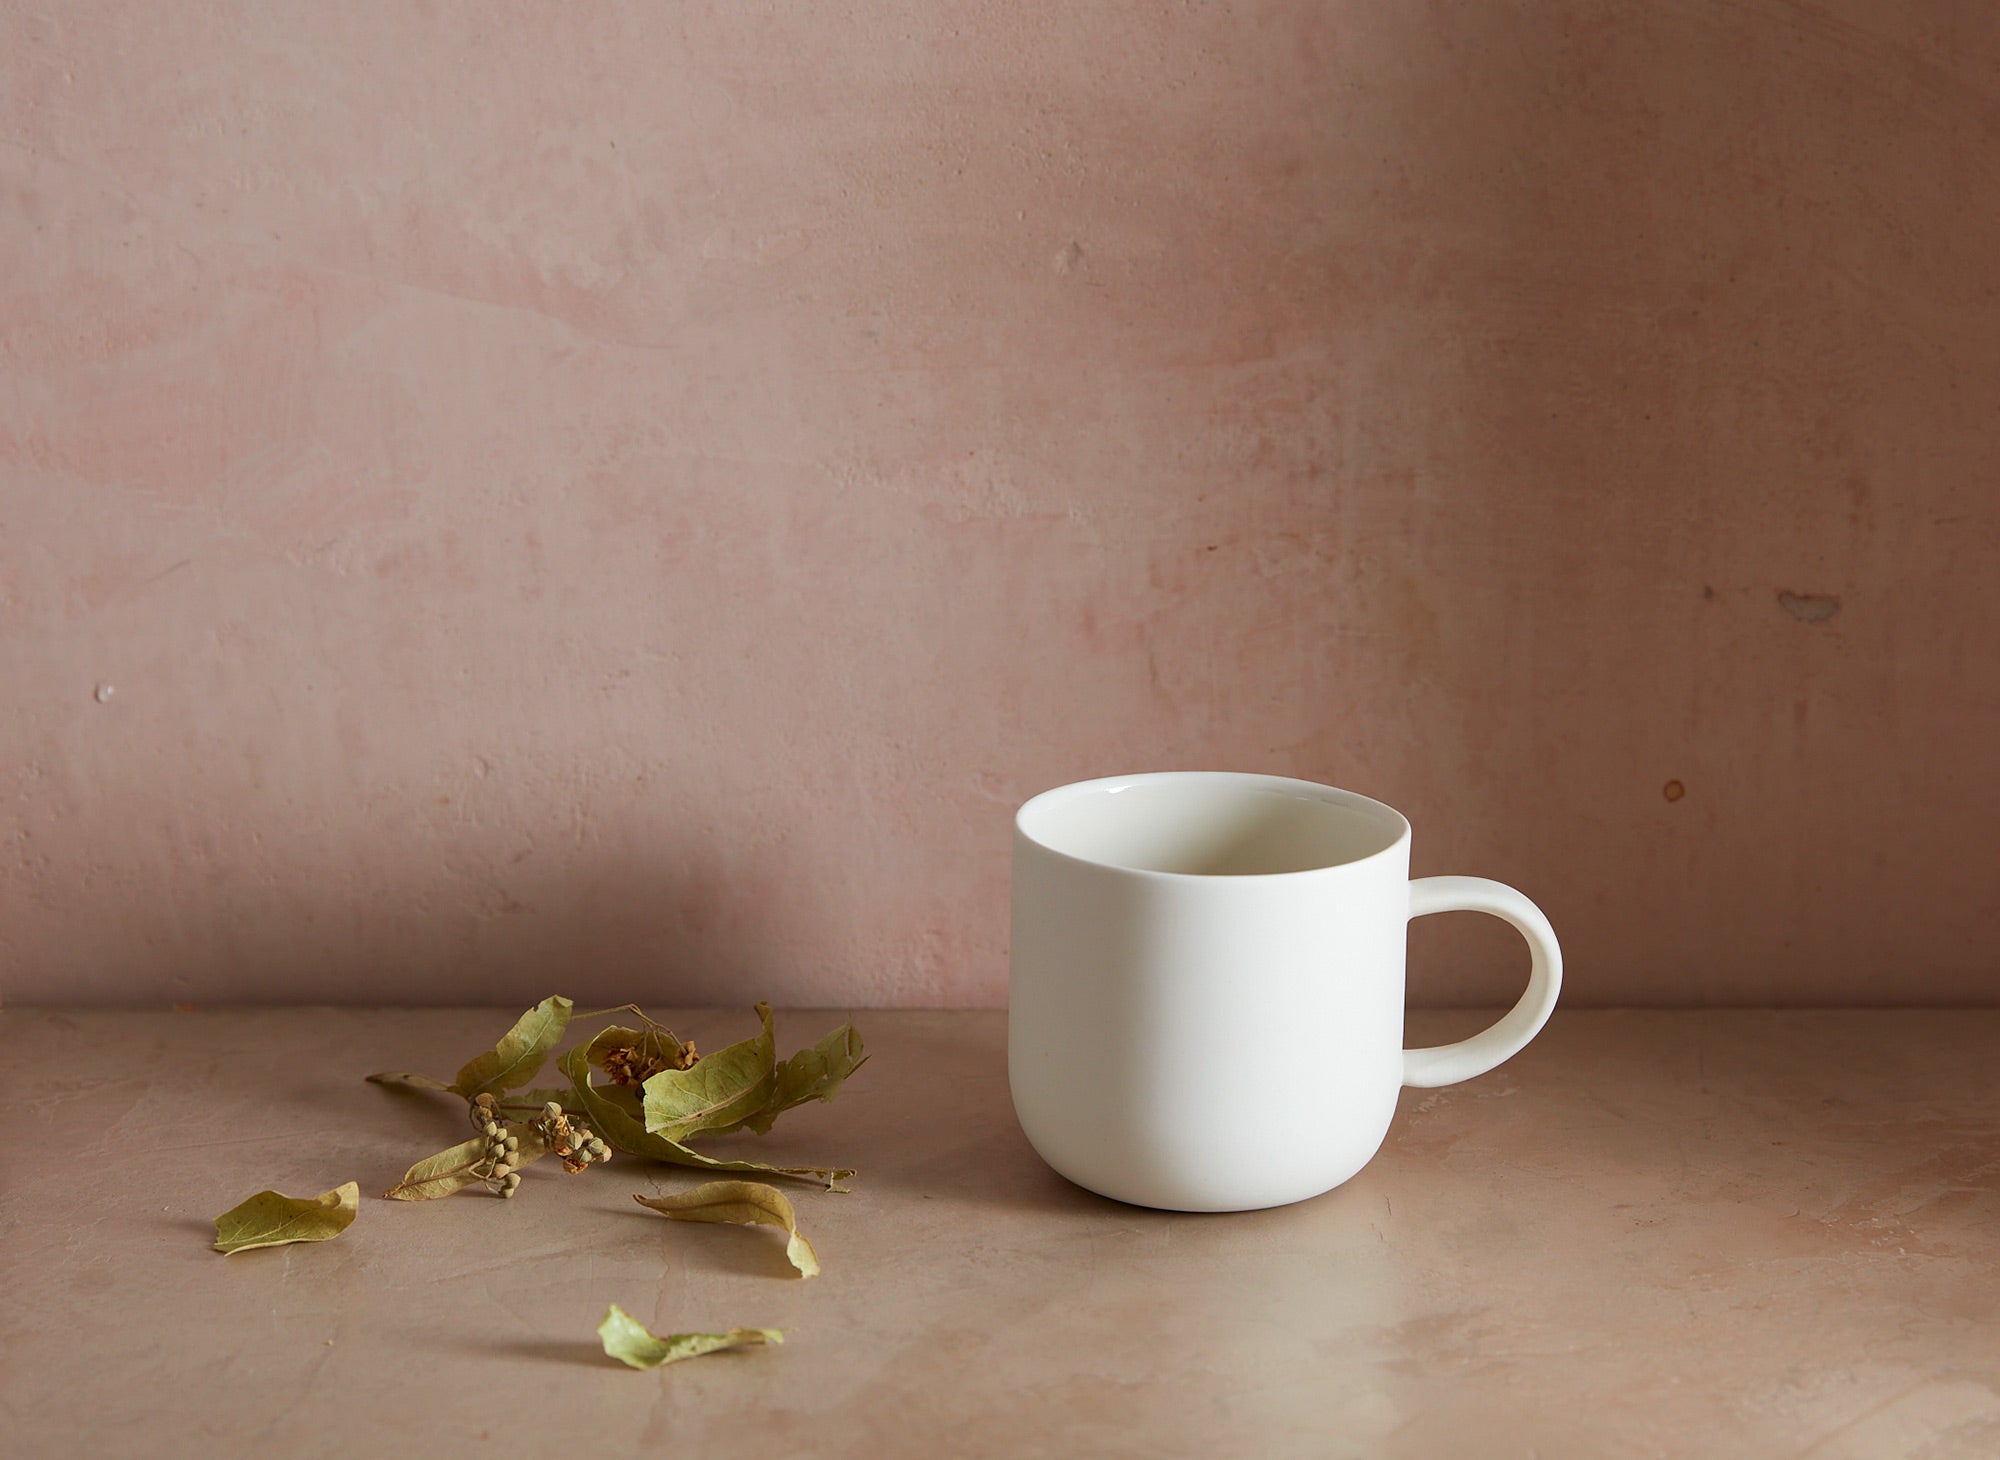 Shop luxury tea cups from BELLOCQ and discover your new tea ritual. Explore unique and traditional japanese tea cups from the finest artisans in the world.